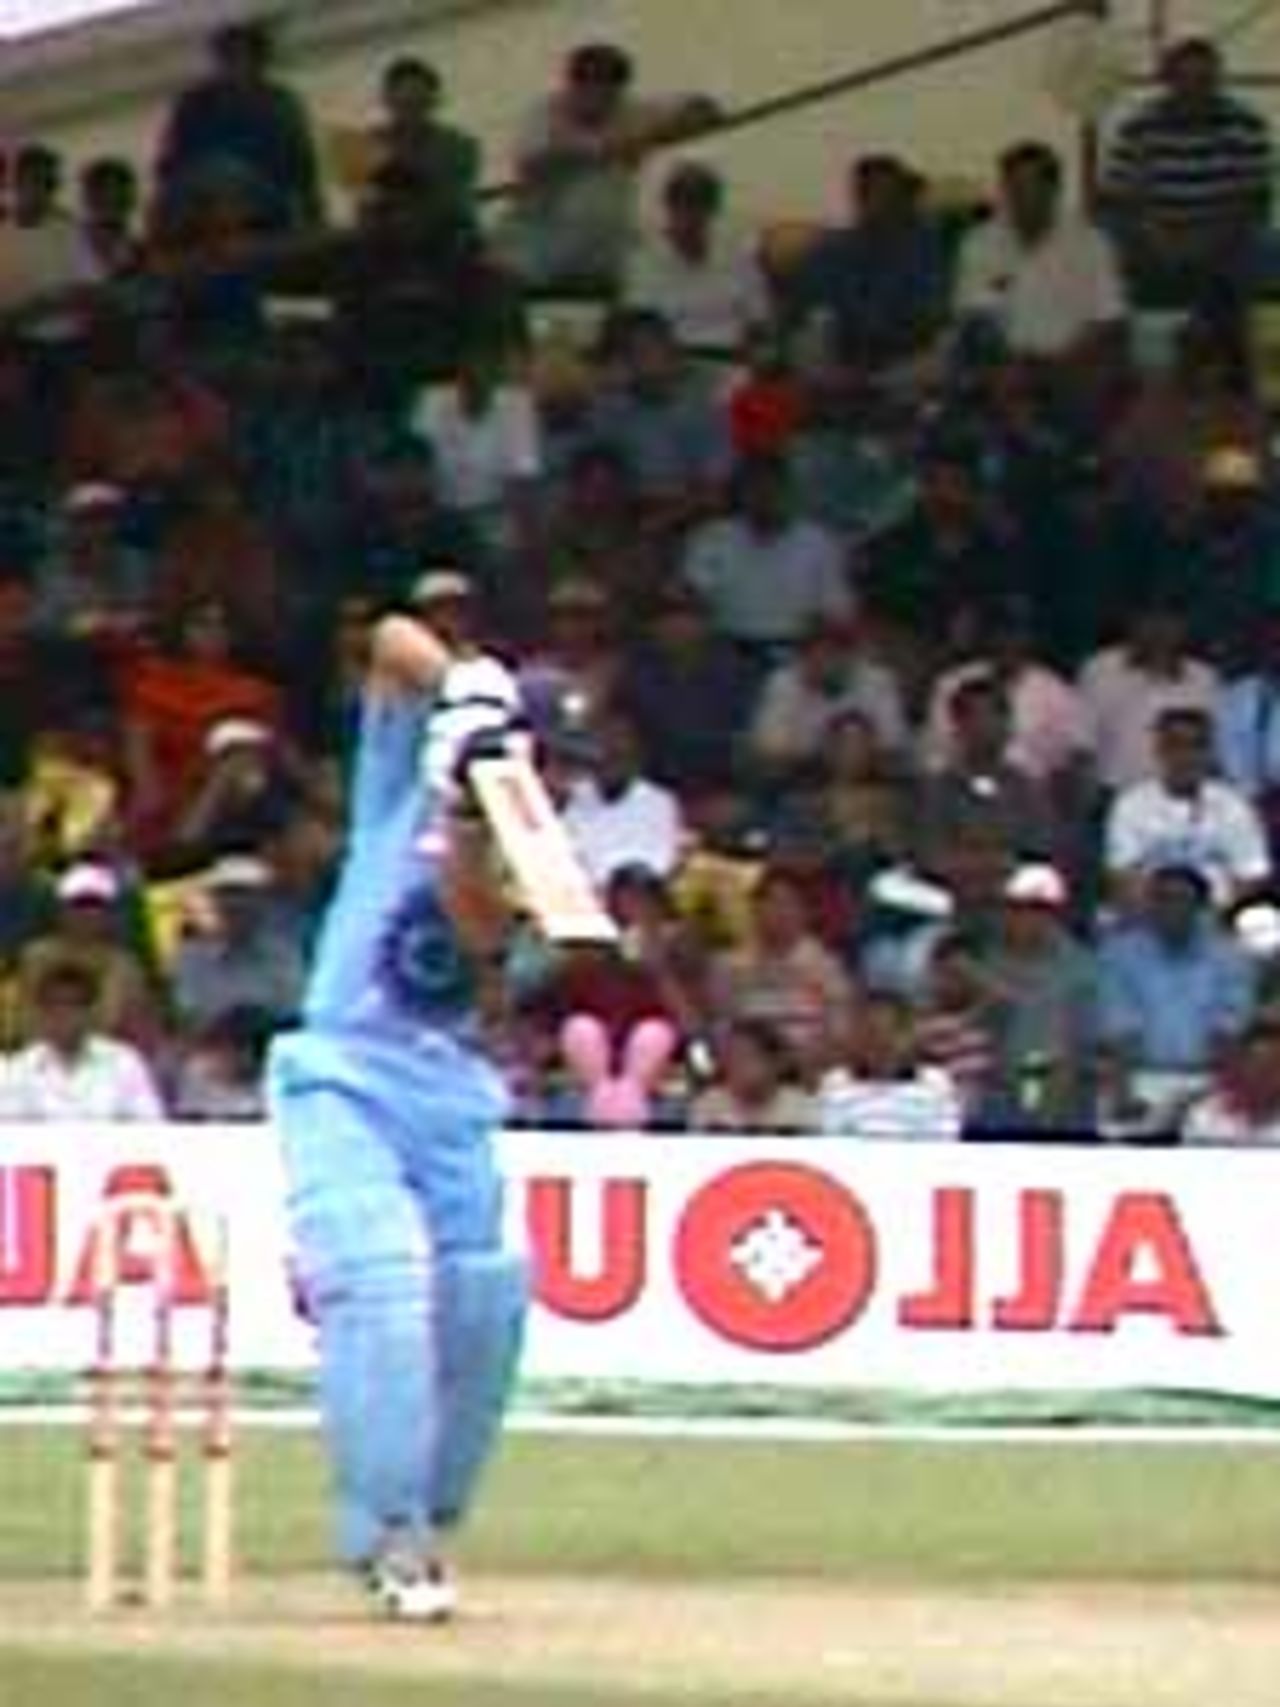 Ganguly presents the full-face of the bat to the ball, India v Zimbabwe (2nd ODI), Coca-Cola Singapore Challenge, 1999-2000, Kallang Ground, Singapore, 4 Sep 1999